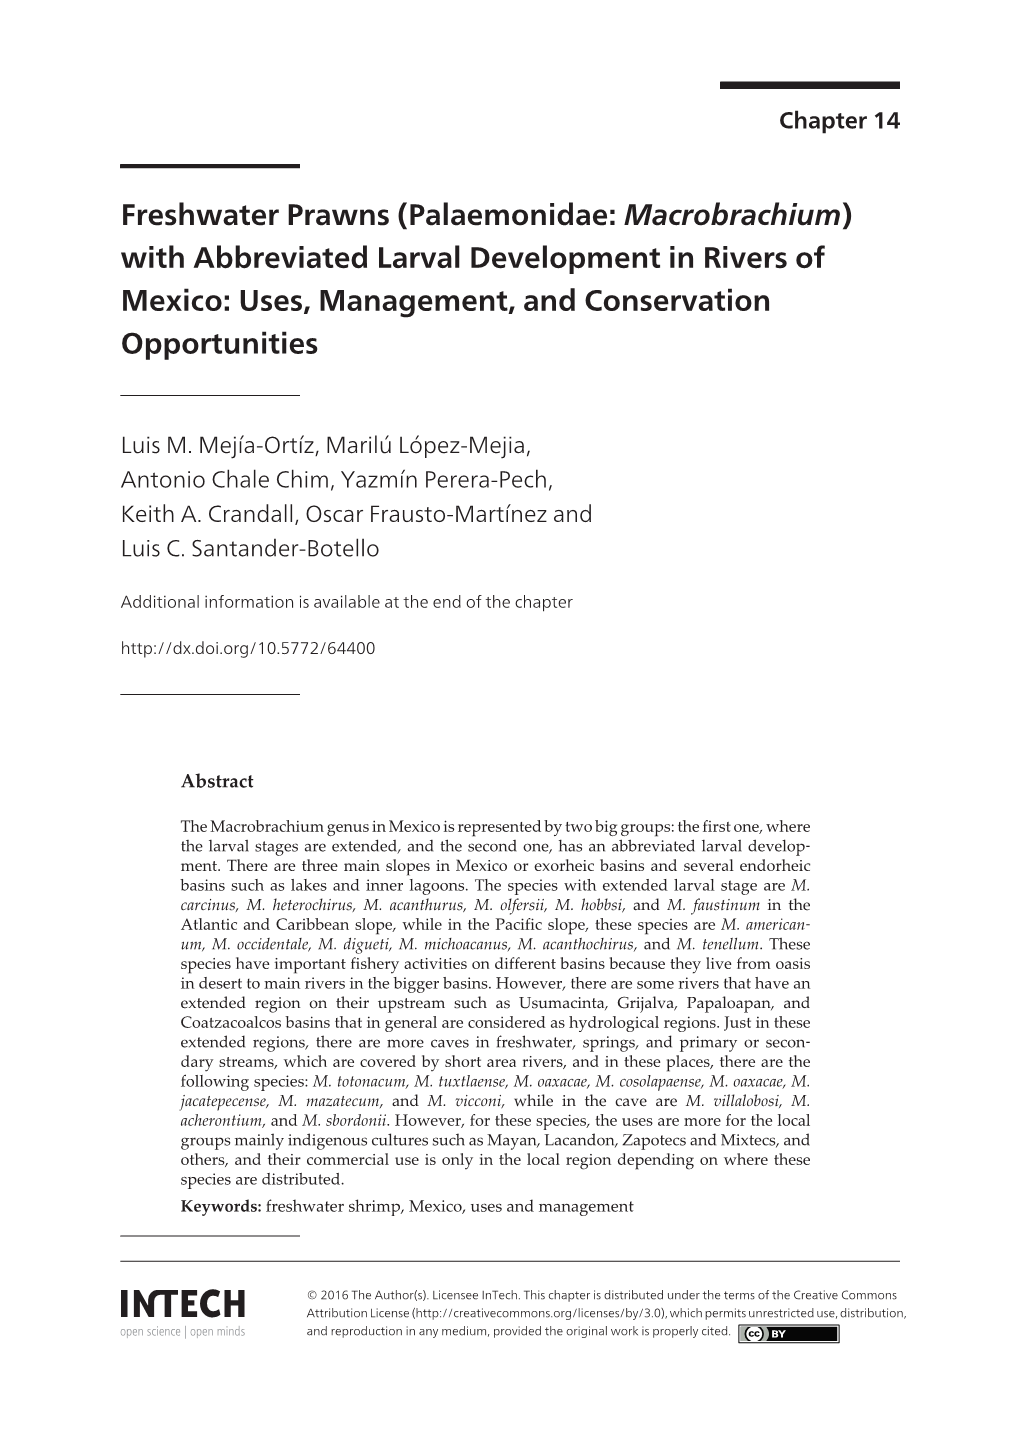 Freshwater Prawns (Palaemonidae: Macrobrachium) with Abbreviated Larval Development in Rivers of Mexico: Uses, Management, and Conservation Opportunities